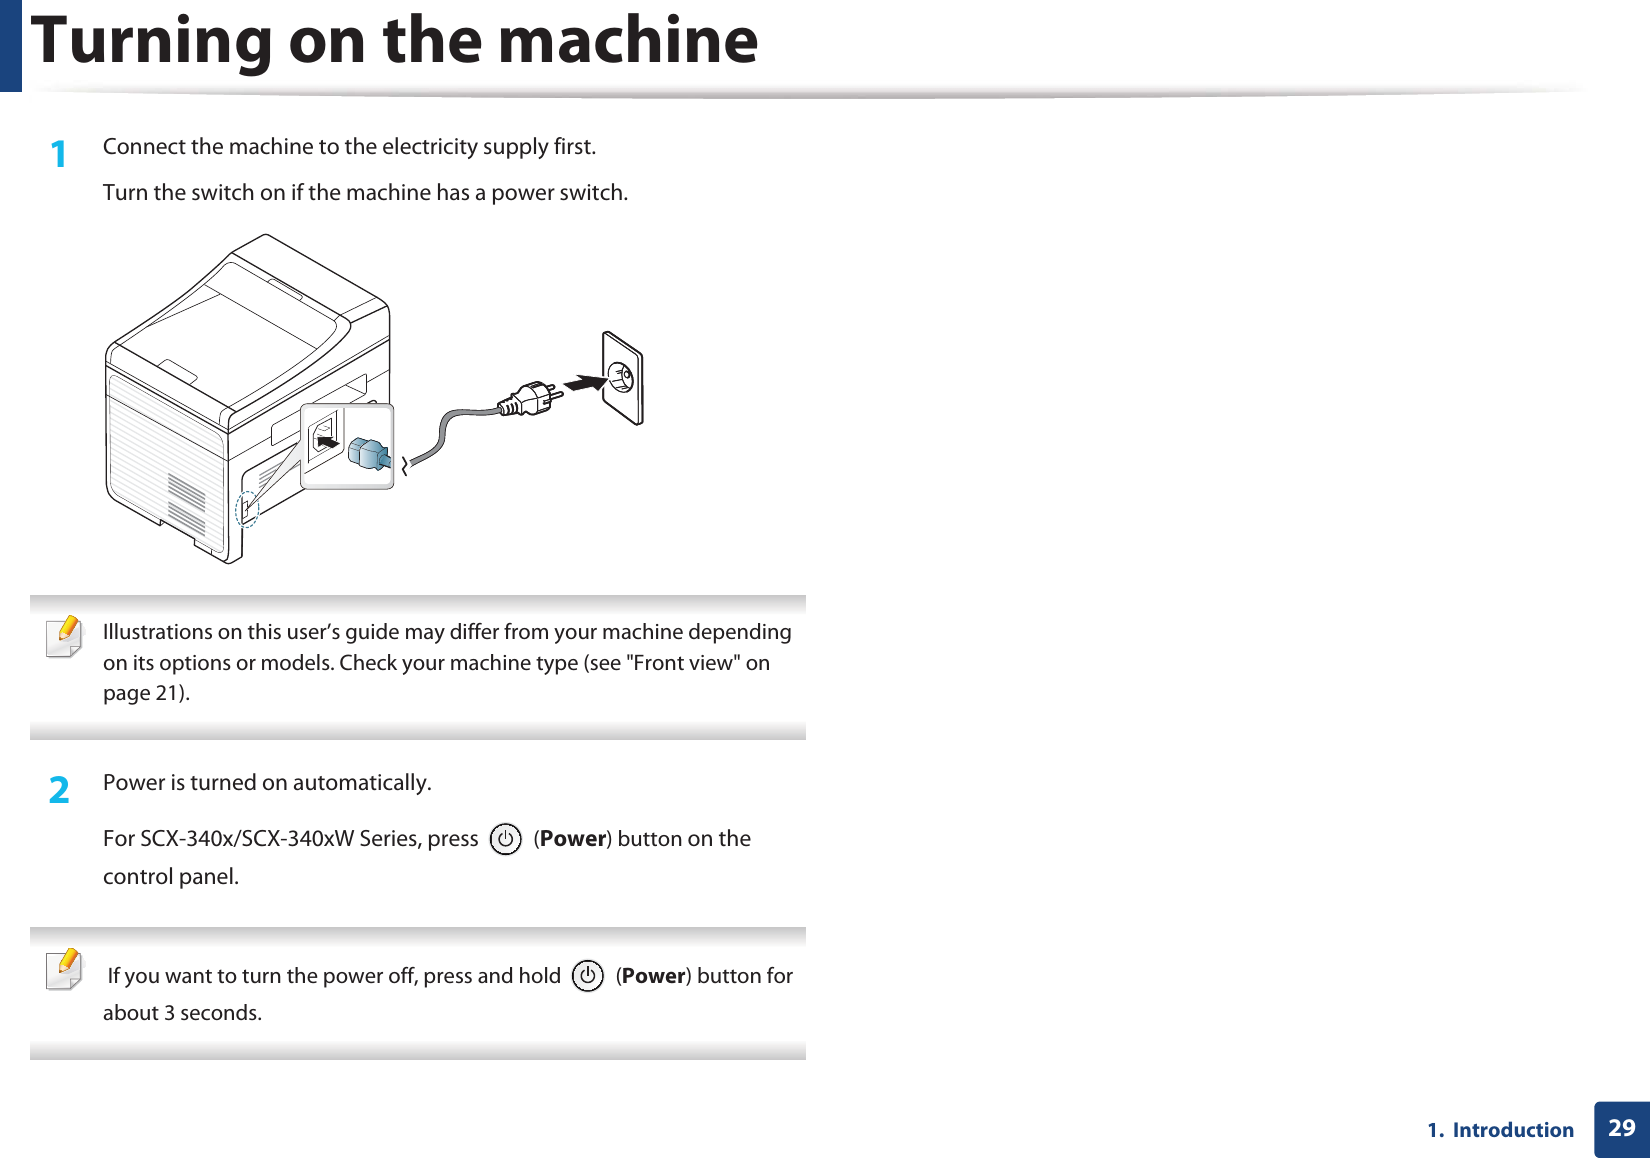 291.  IntroductionTurning on the machine1Connect the machine to the electricity supply first.Turn the switch on if the machine has a power switch. Illustrations on this user’s guide may differ from your machine depending on its options or models. Check your machine type (see &quot;Front view&quot; on page 21). 2  Power is turned on automatically.For SCX-340x/SCX-340xW Series, press   (Power) button on the control panel.  If you want to turn the power off, press and hold   (Power) button for about 3 seconds. 